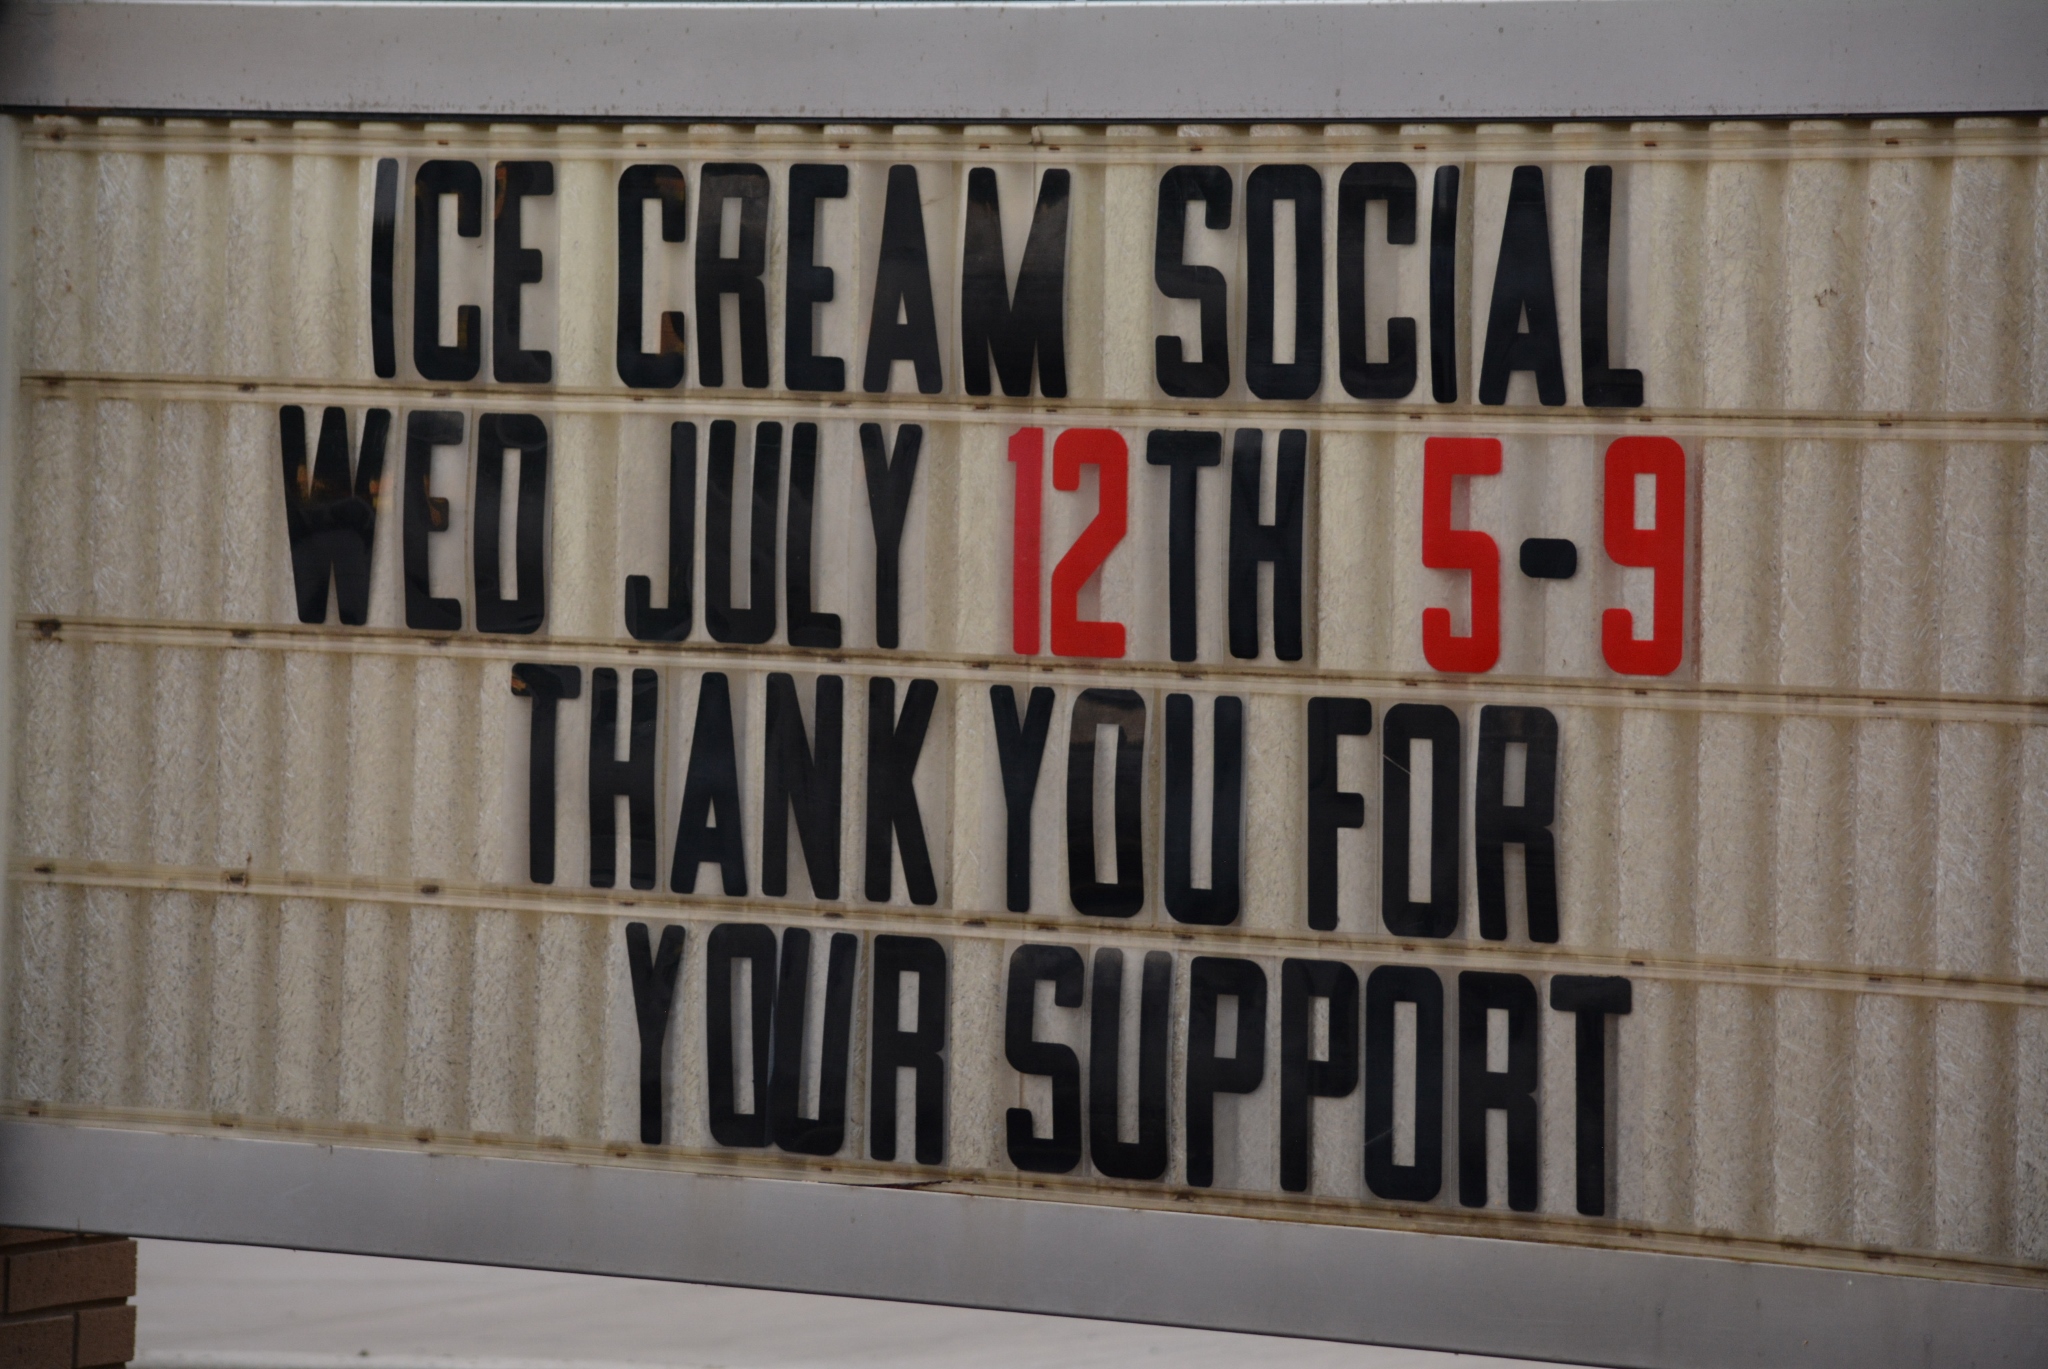 12-07-17  Other - Ice Cream Social